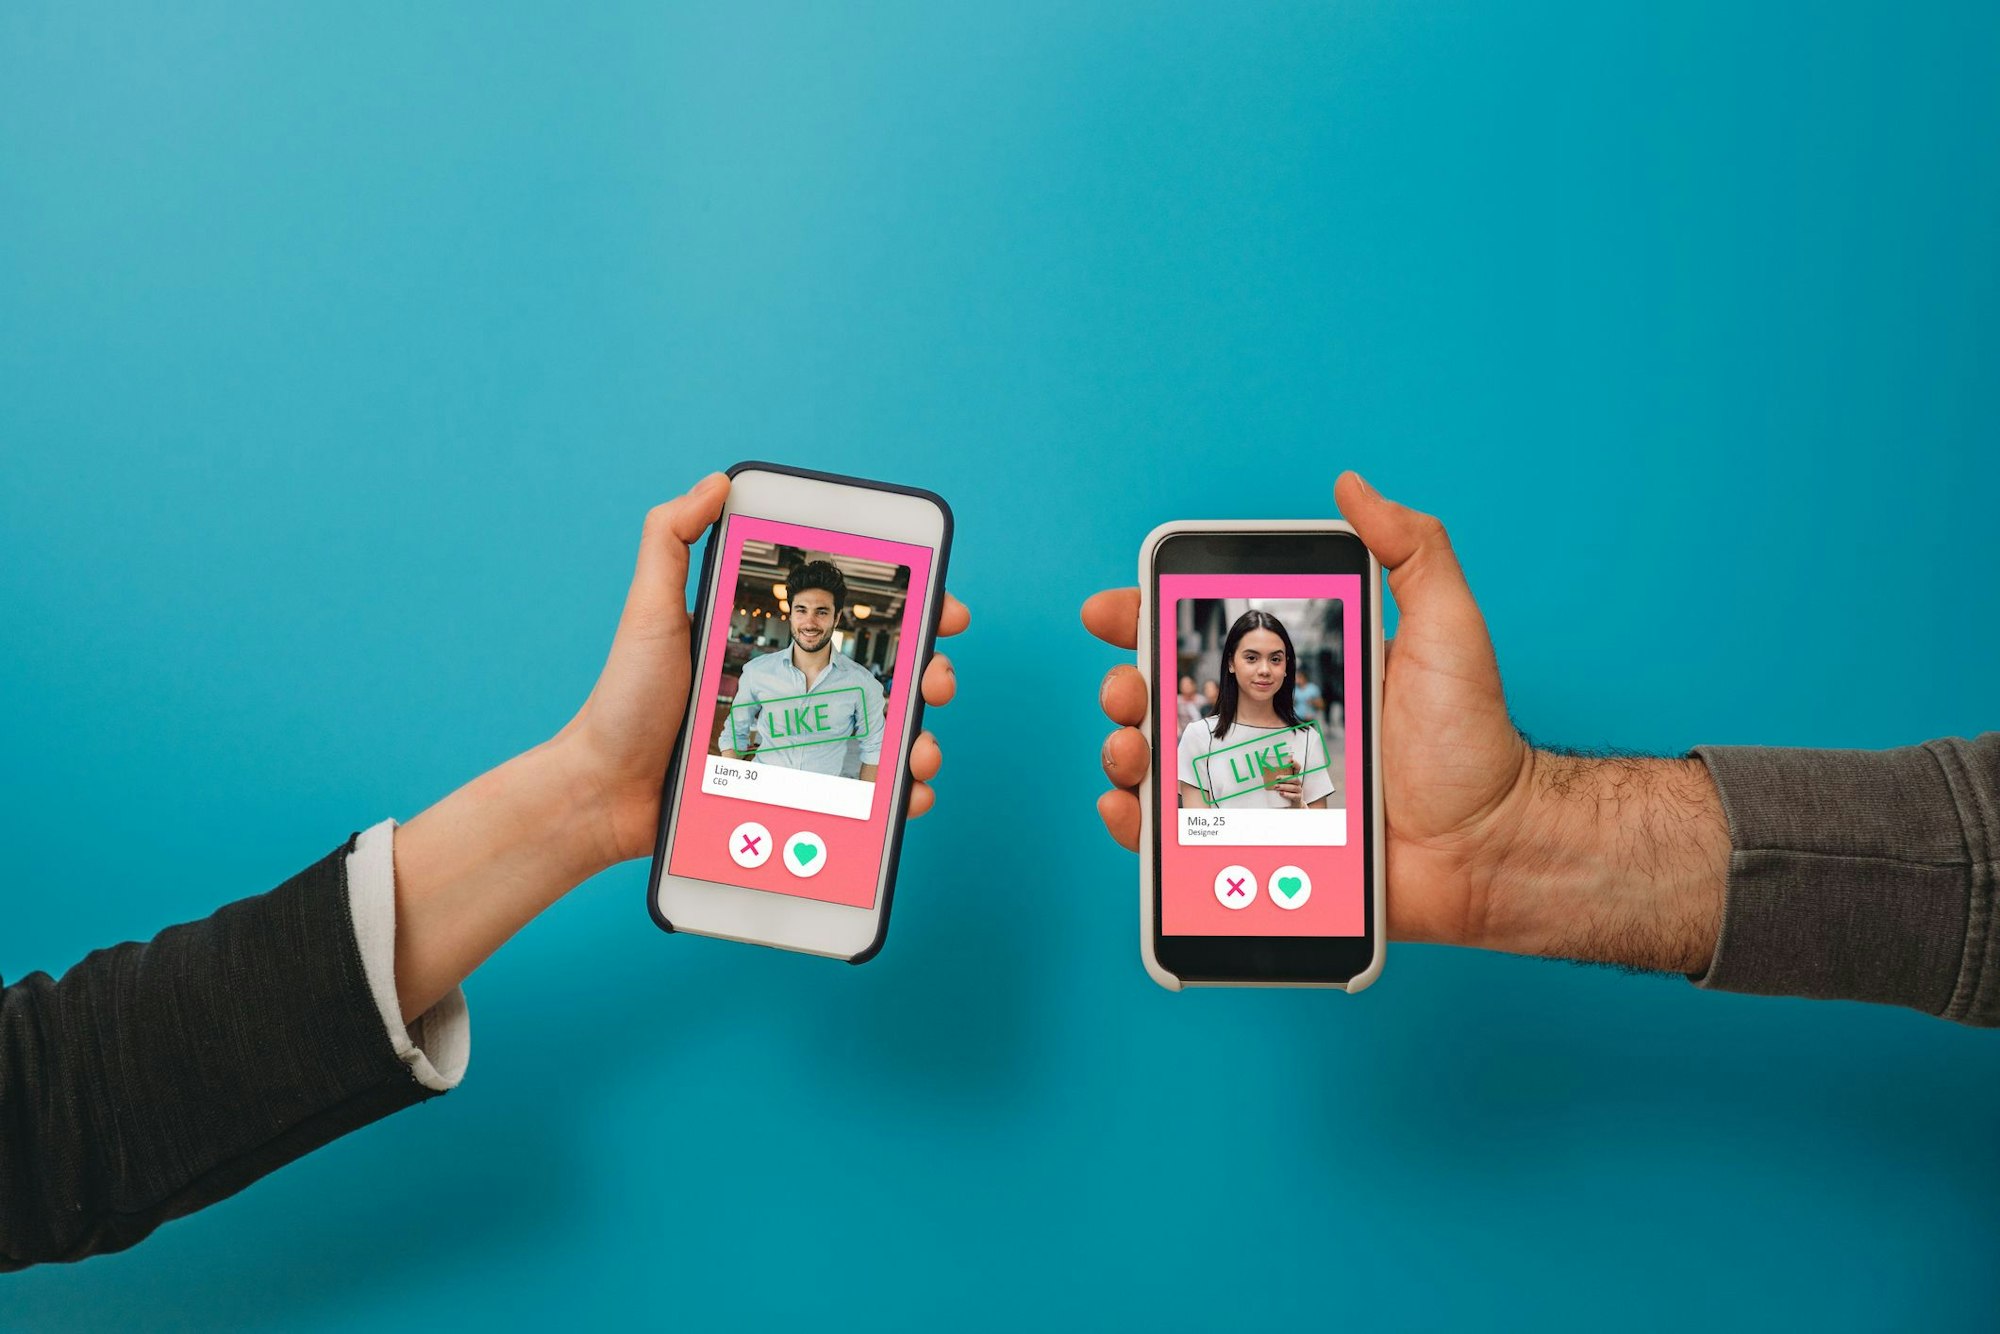 Conceptual image of two hands holding smart phones with an online dating app on the screen. Online dating app concept. Blue background.